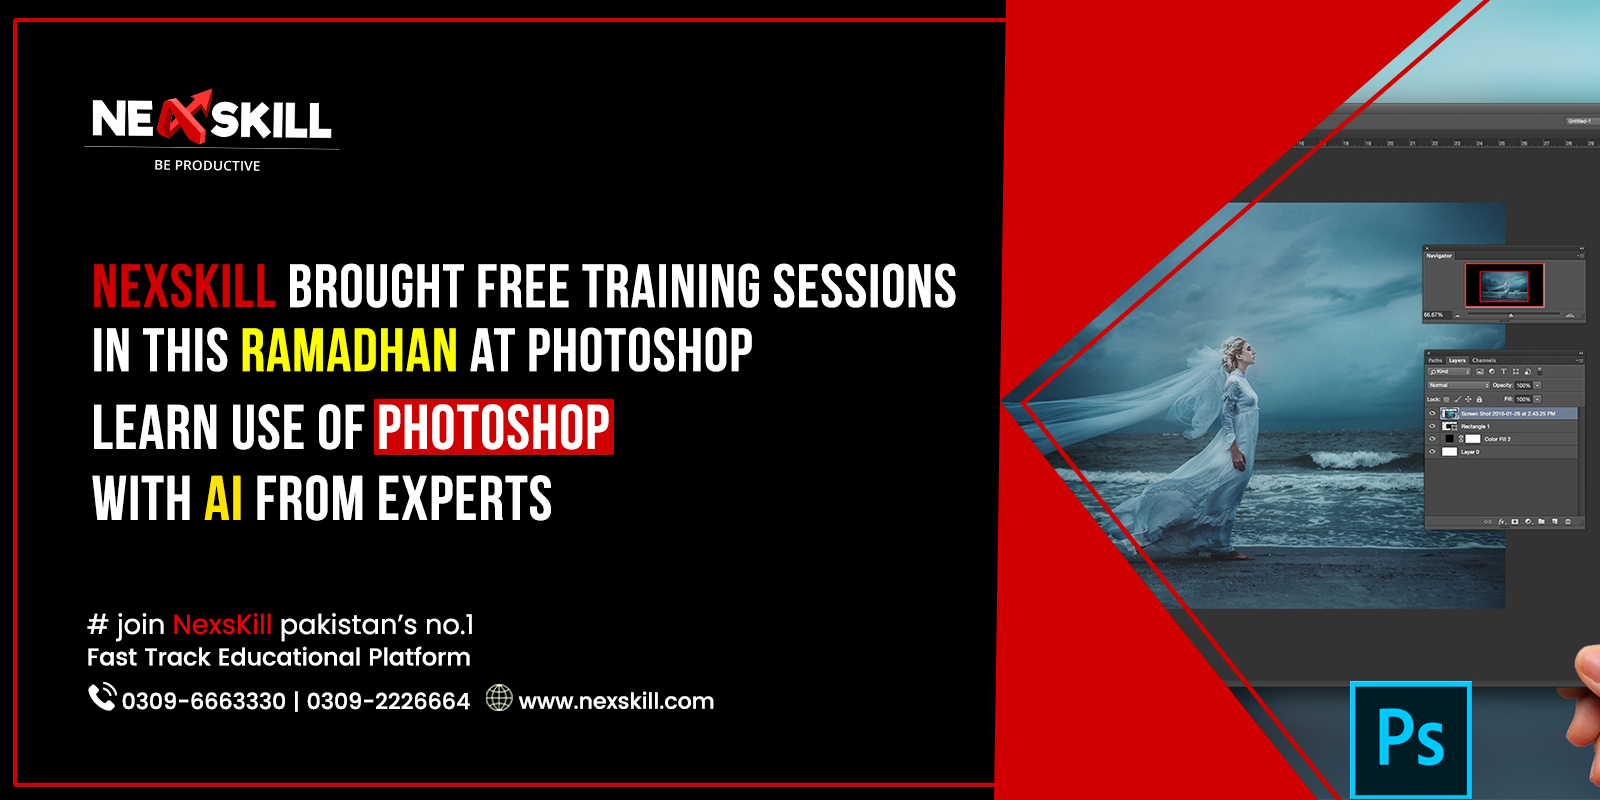 Nexskill Brought Free Training Sessions in This Ramadhan at Photoshop – Learn use of Photoshop with AI from Experts